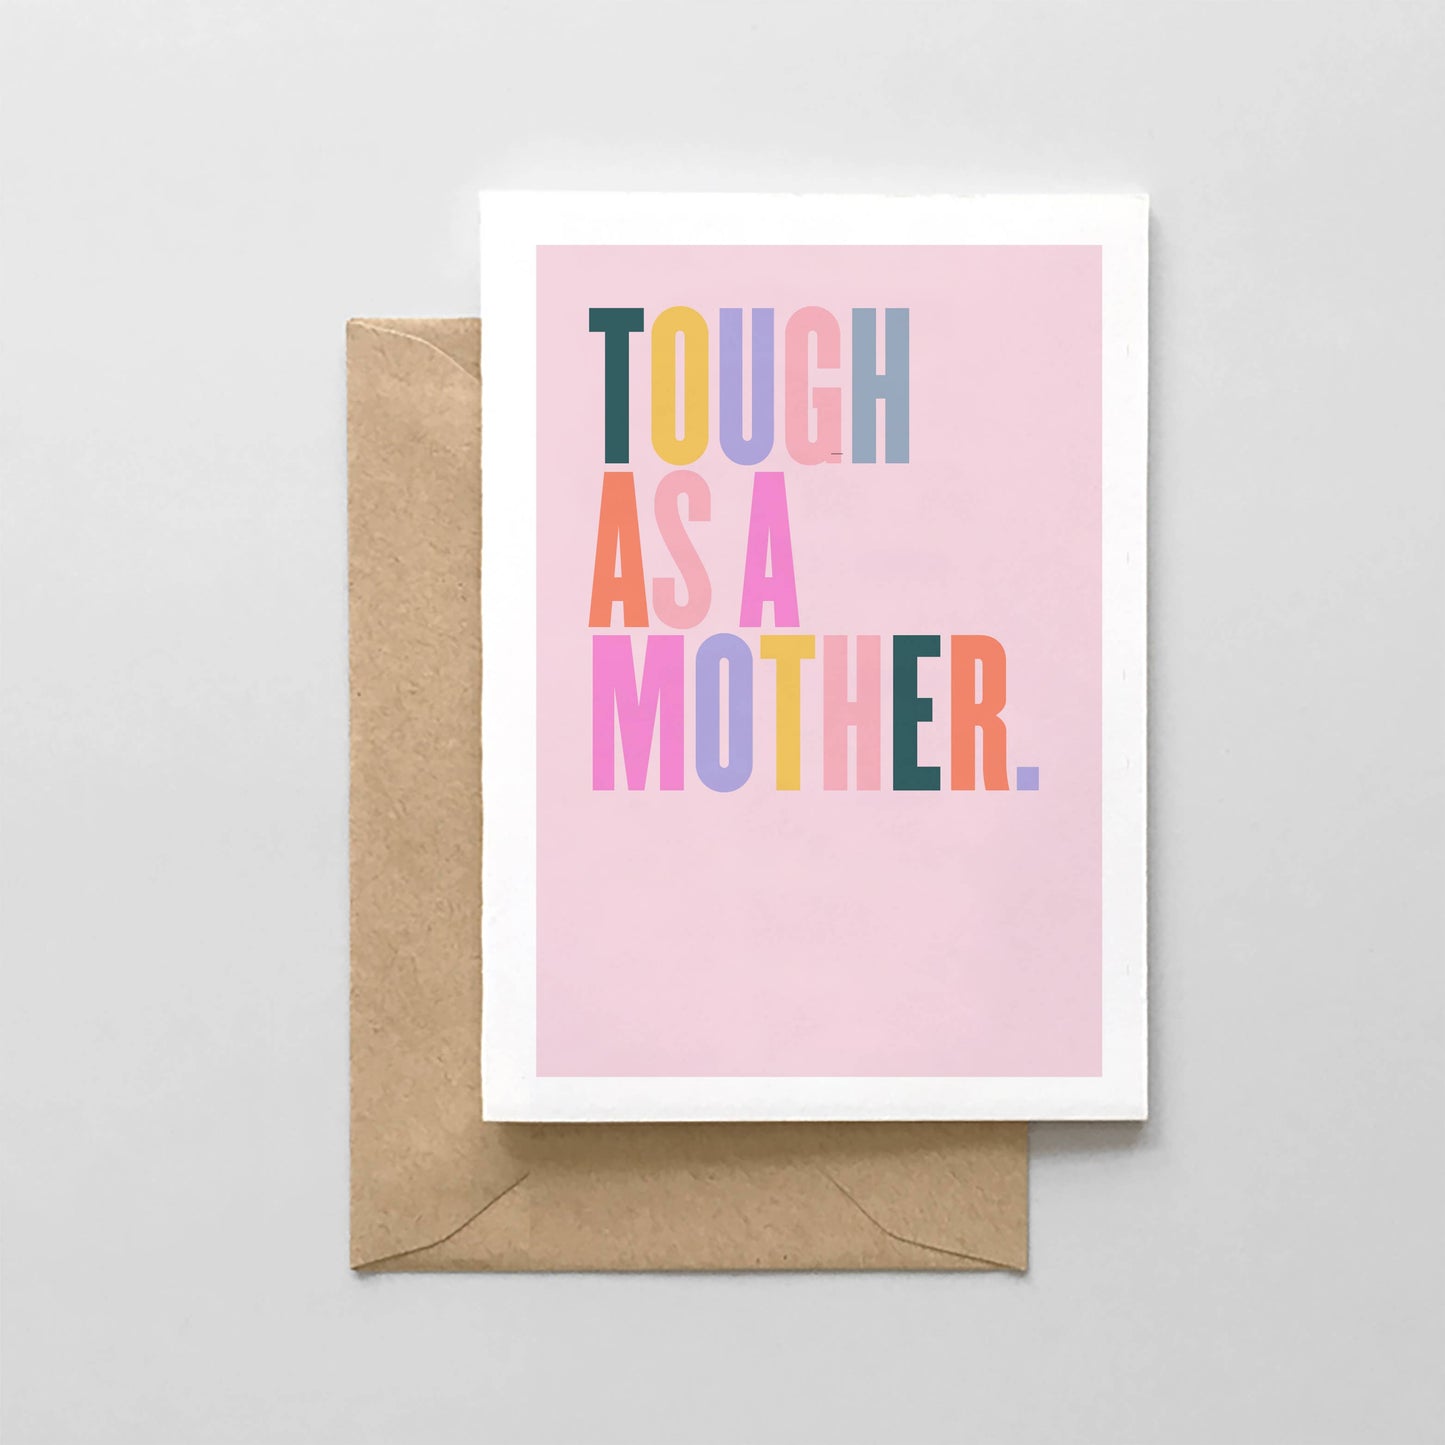 Spaghetti & Meatballs - TOUGH AS A MOTHER - Mother's Day Card